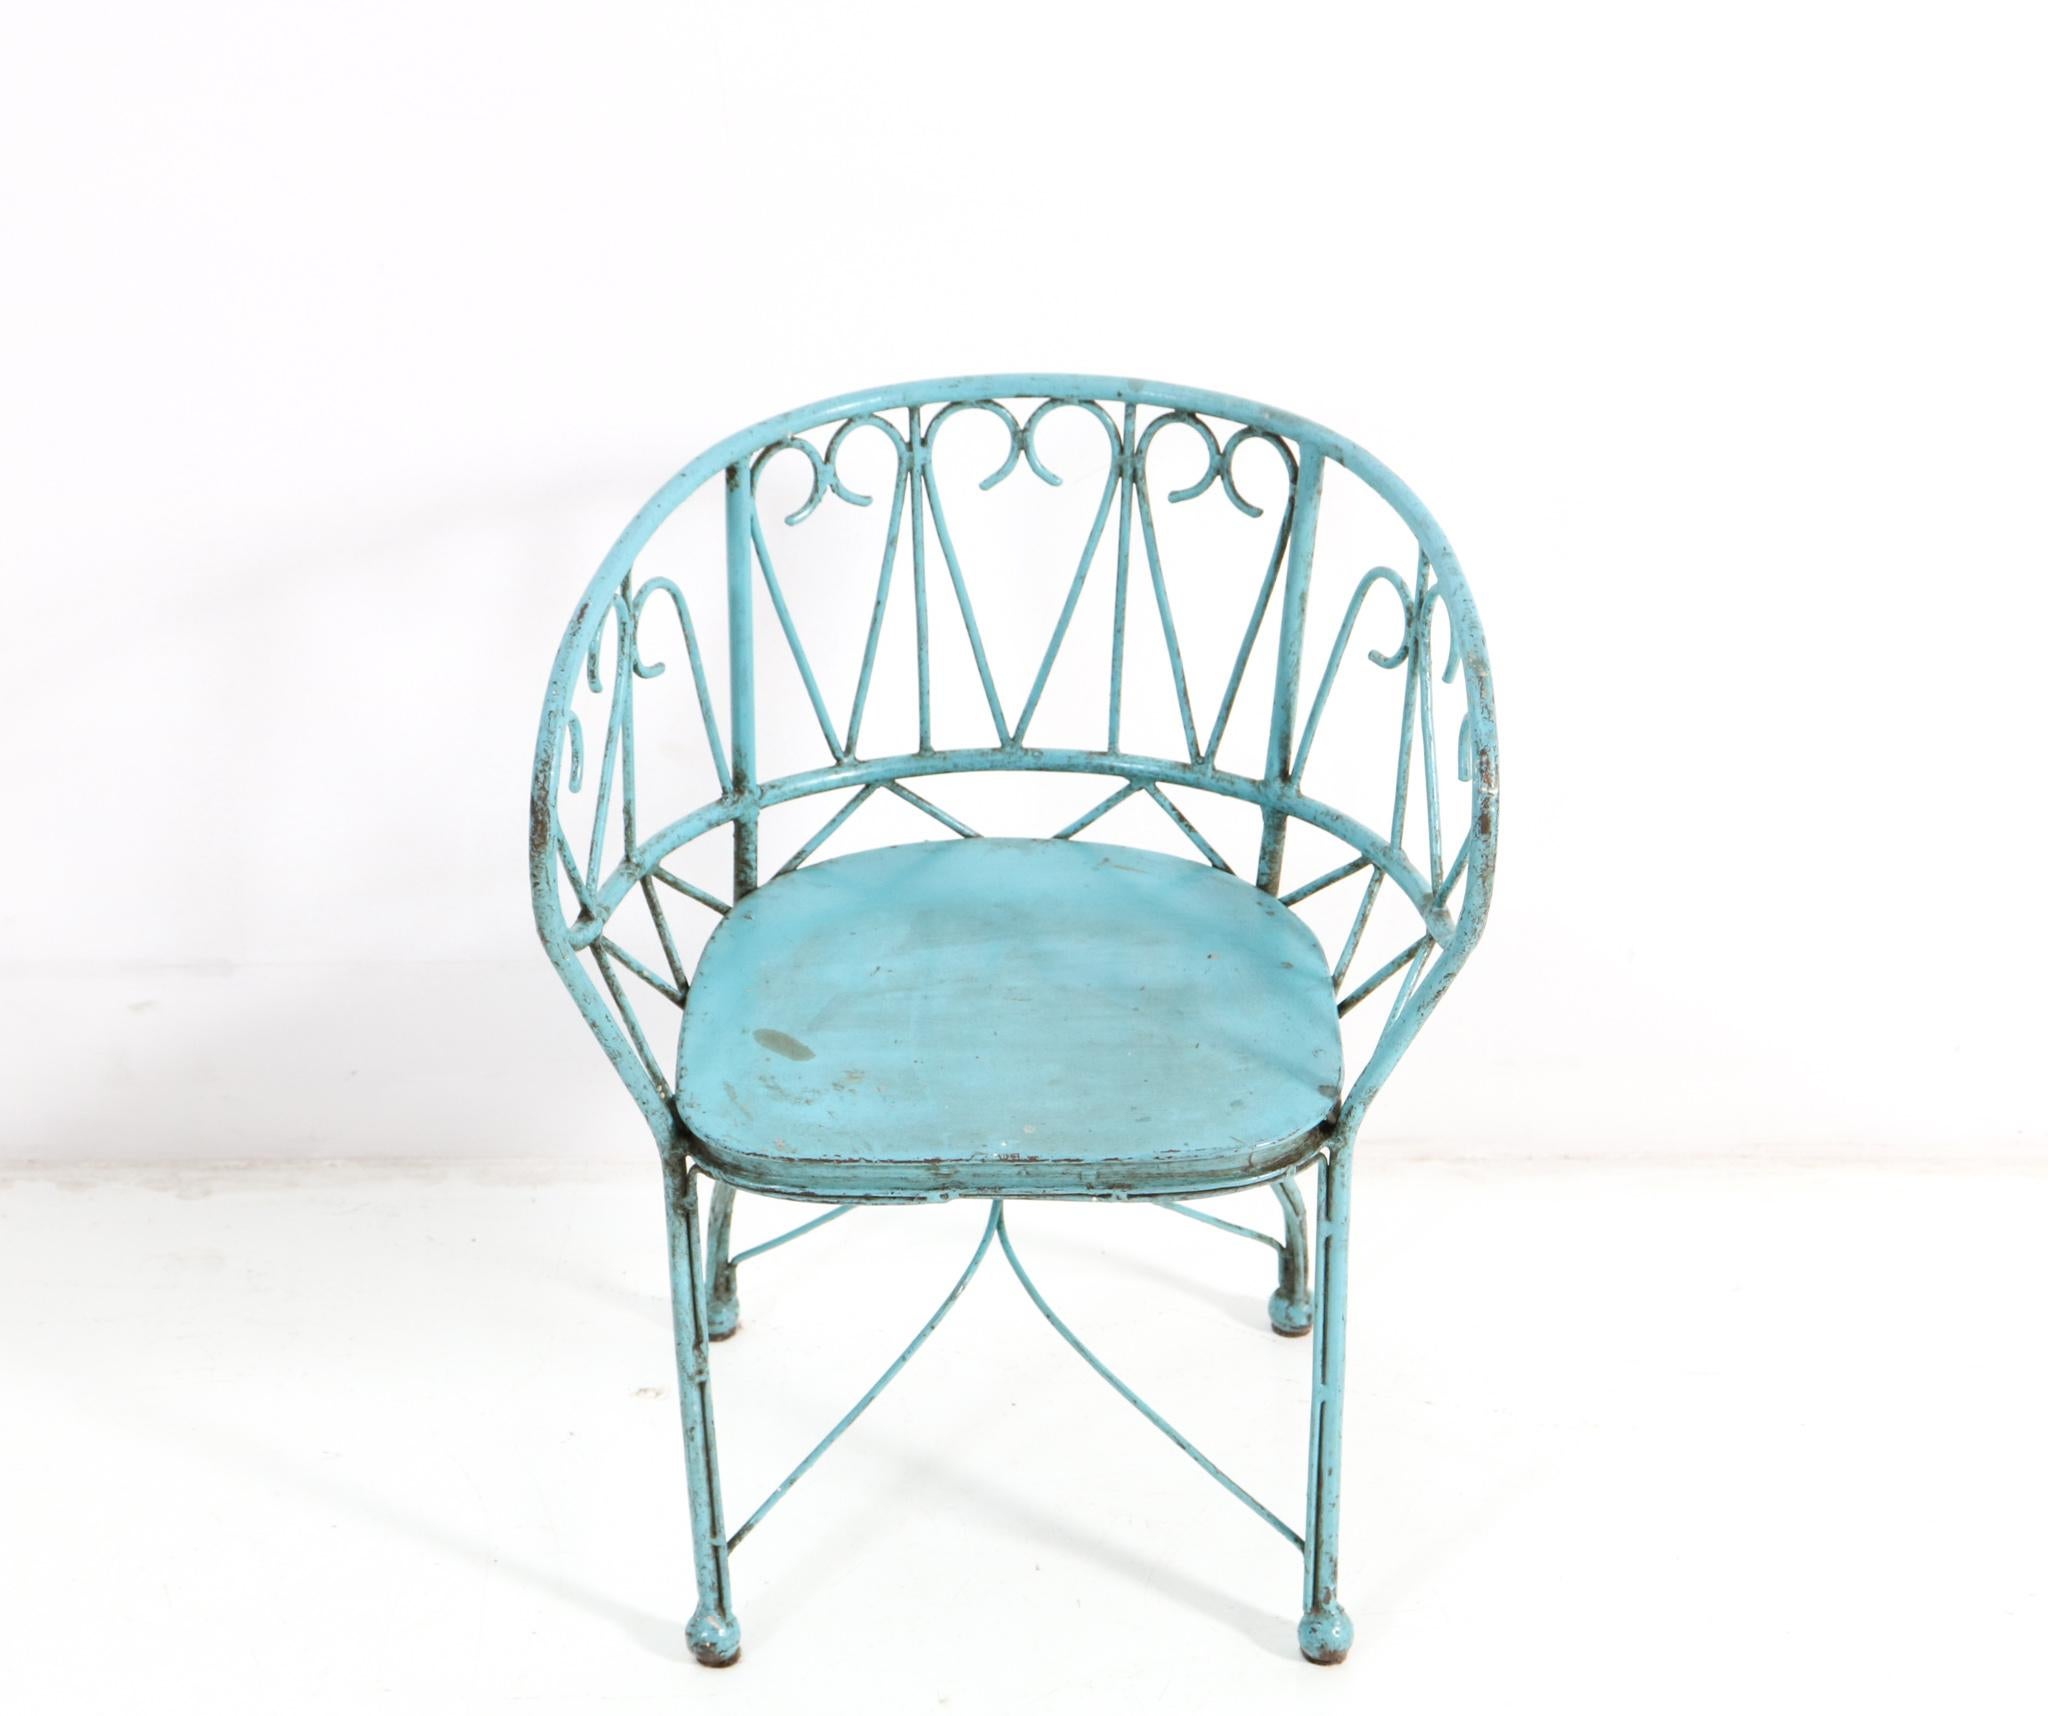 Stunning and rare Art Nouveau children's armchair.
Striking French design from the 1900s.
Blue lacquered wrought iron.
This wonderful Art Nouveau children's armchair is in good condition.
with minor wear consistent with age and use, preserving a